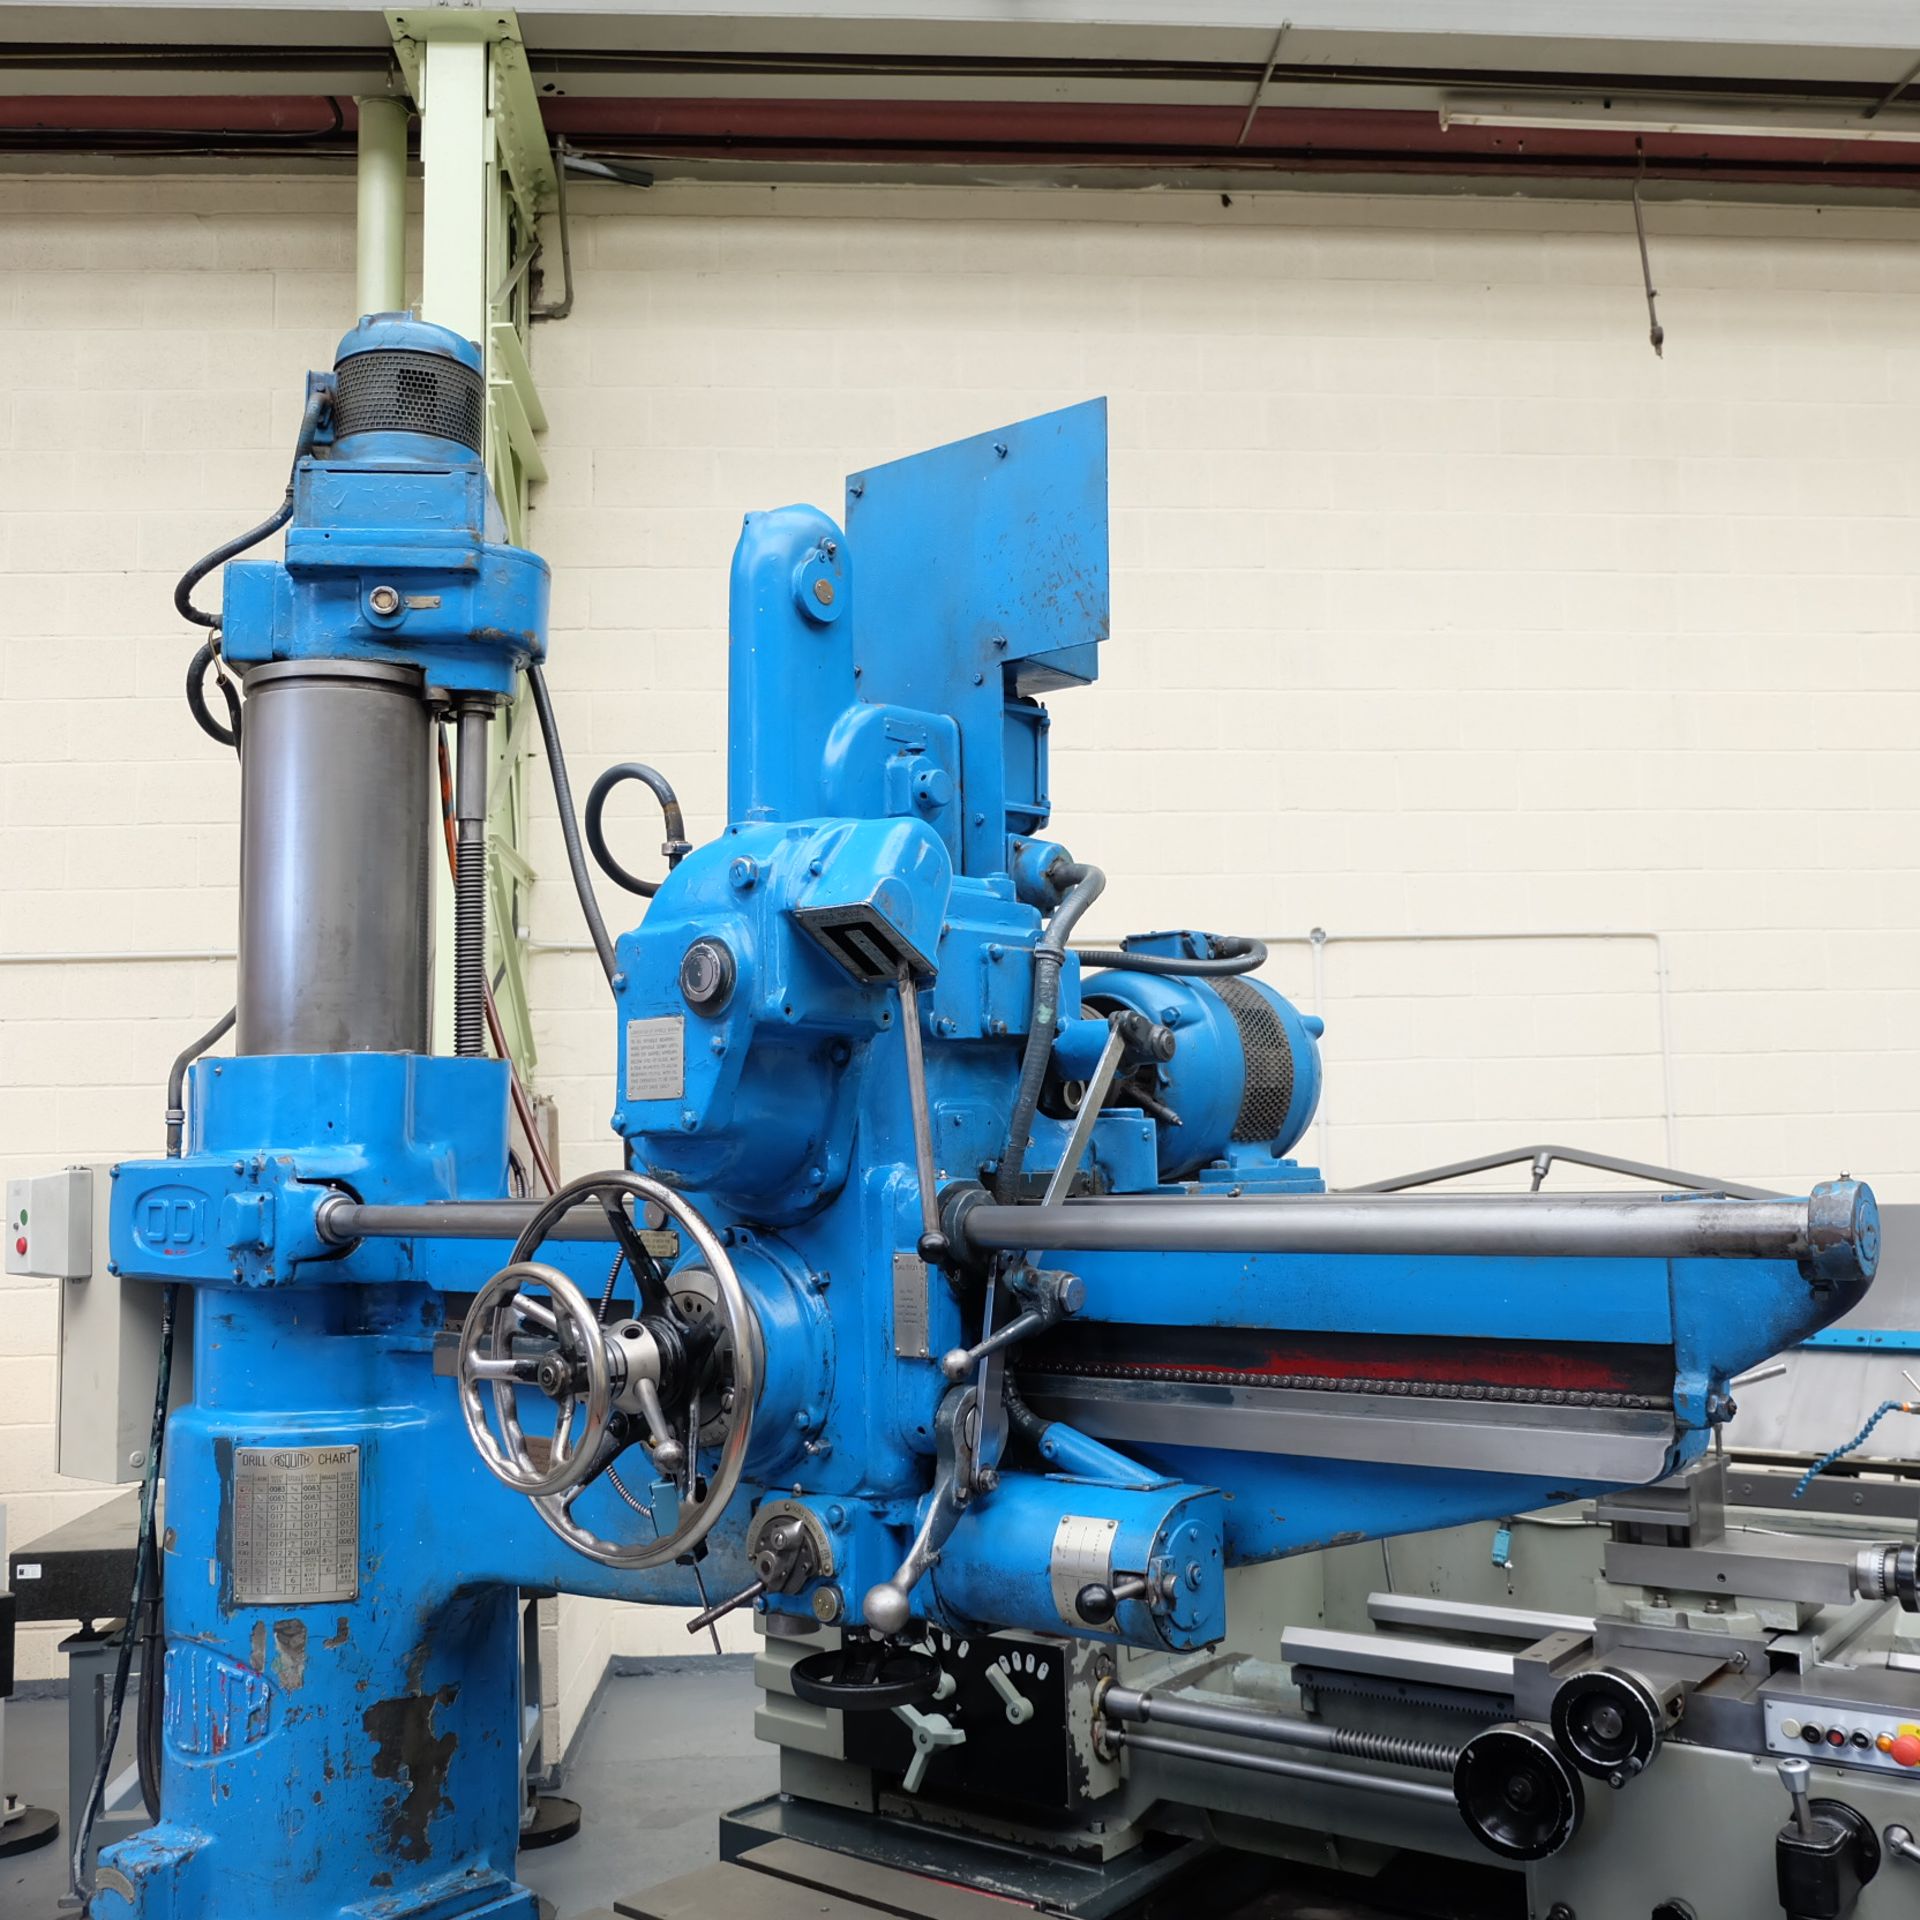 An Asquith Type ODI 6ft Radial Arm Drilling Machine, Spindle Taper 5 Morse, Spindle Speeds 31- - Image 2 of 10